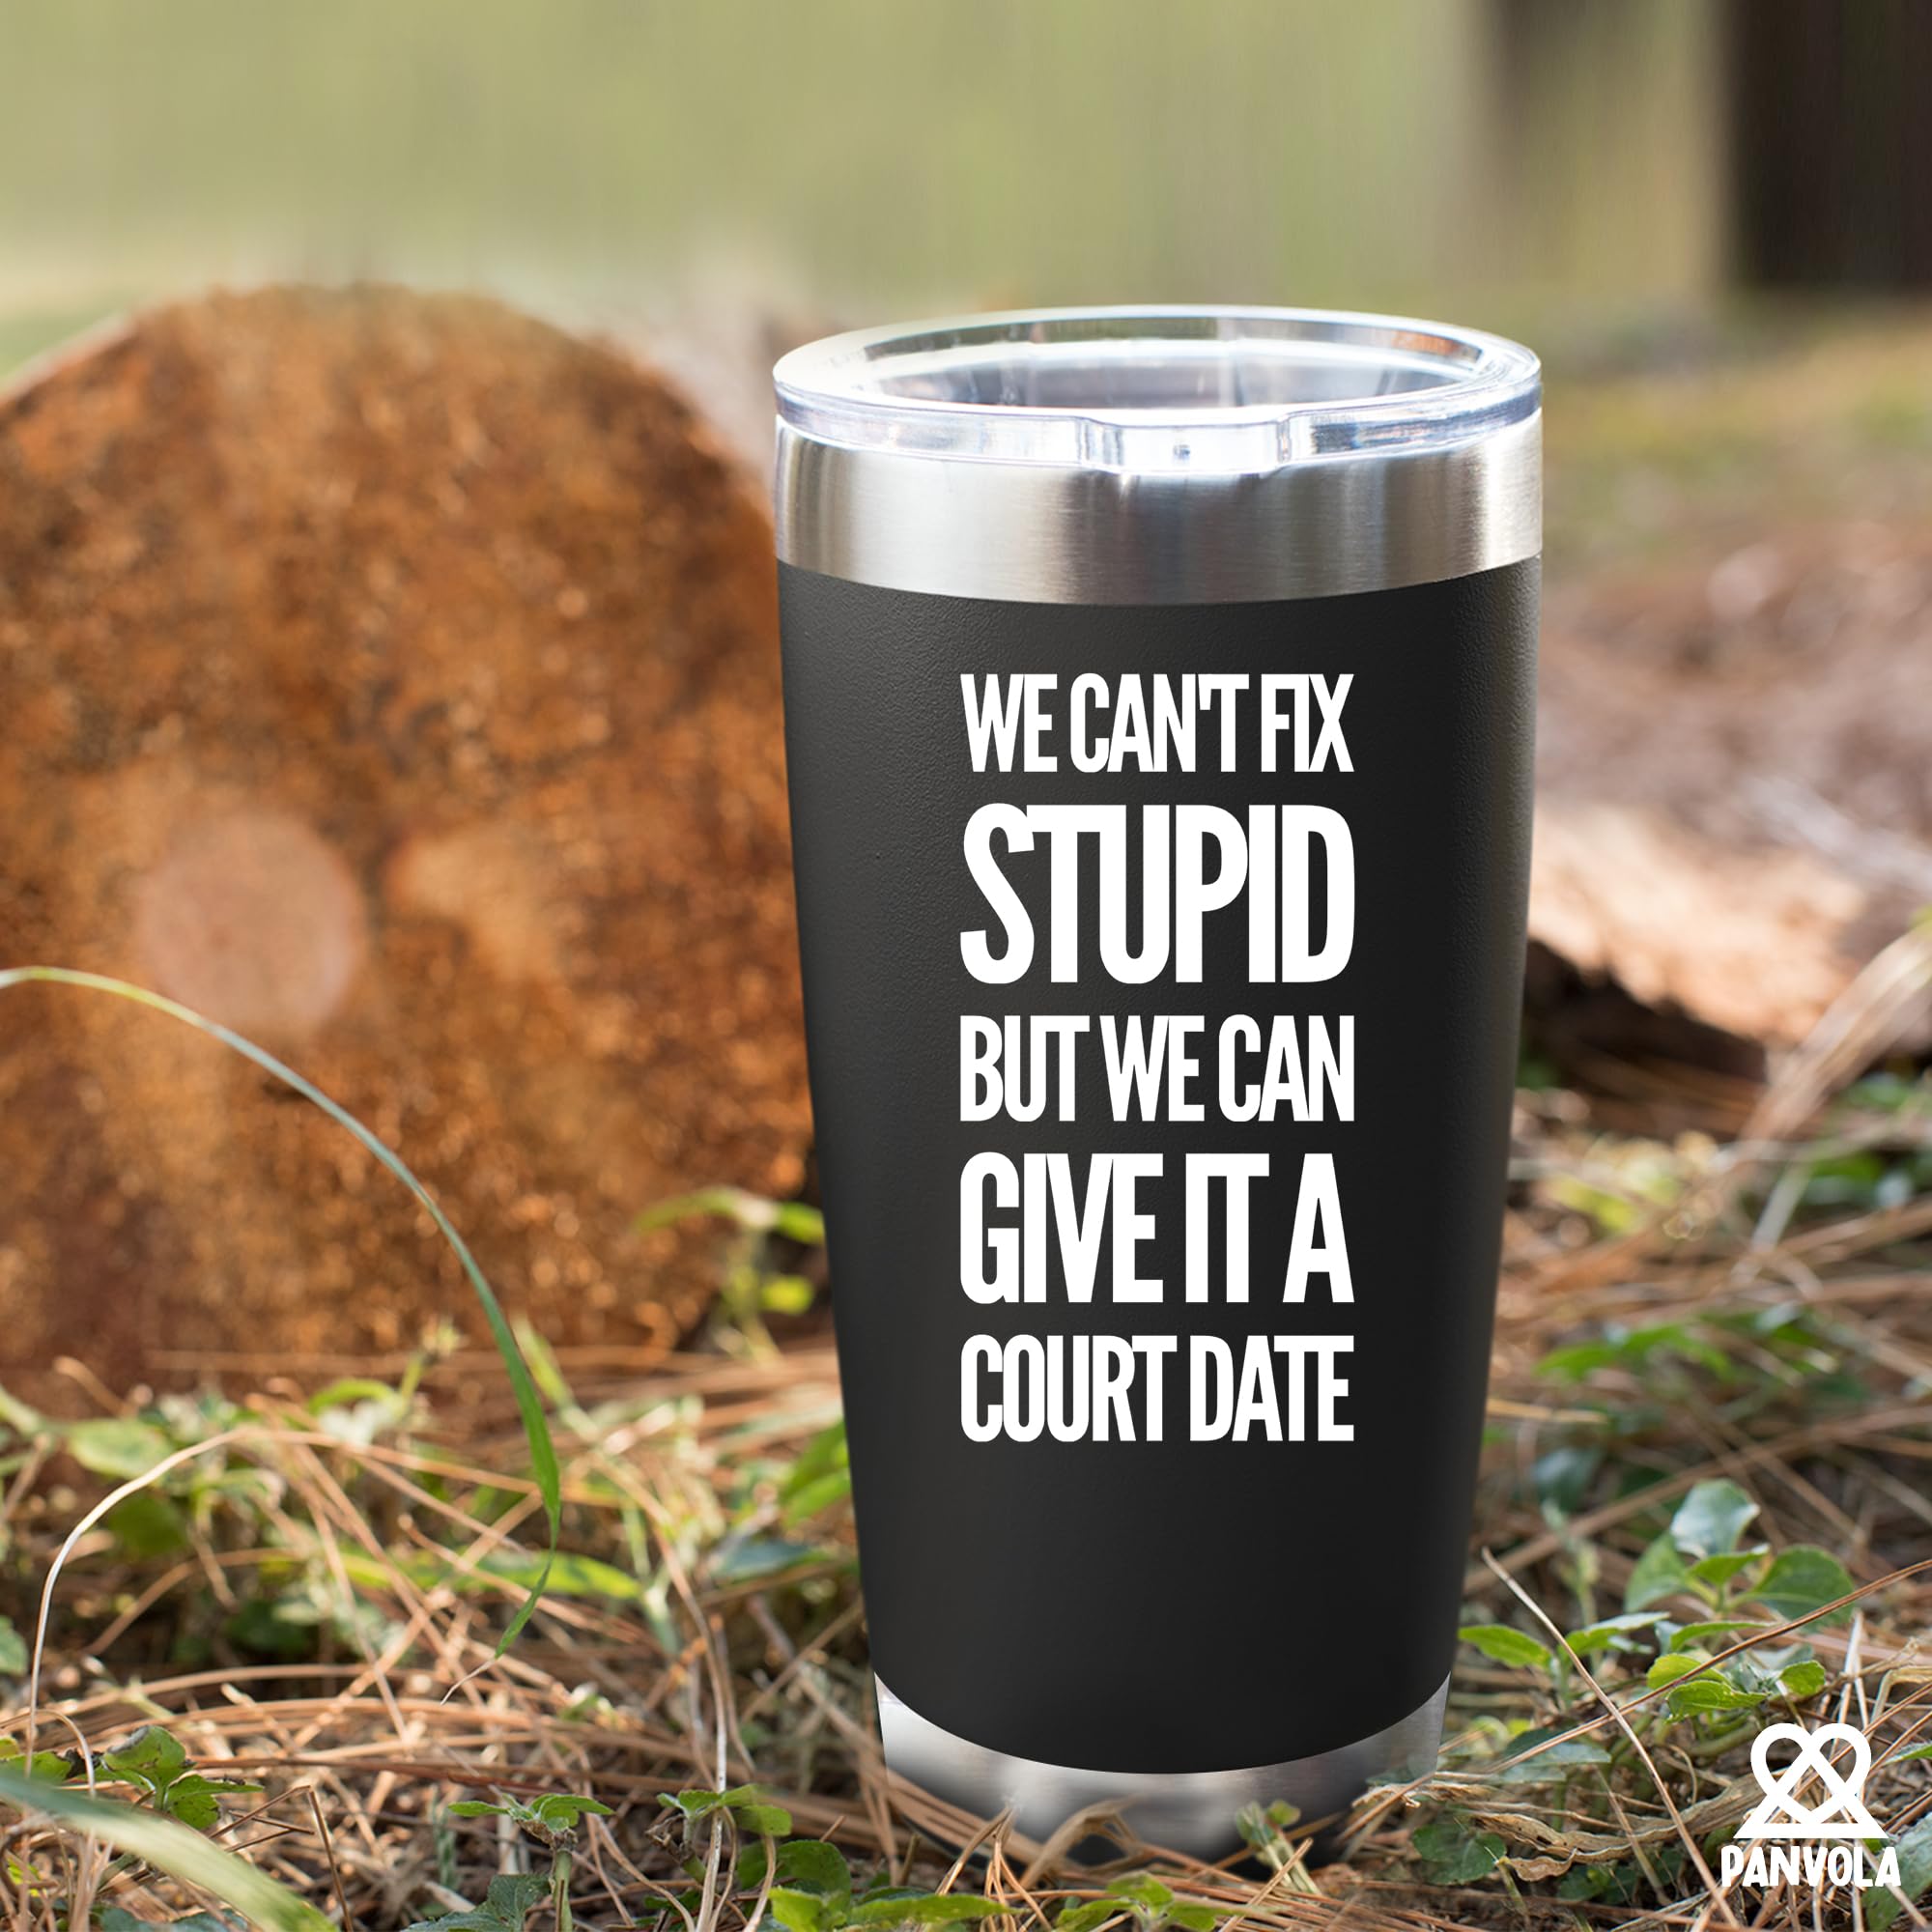 We Can't Fix Stupid But We Can Give It A Court Date Vacuum Insulated Tumbler Lawyer Gifts Law Student Teacher Attorney Dad Mom Husband Wife Stainless Steel With Removable Lid Drinkware (20 oz)